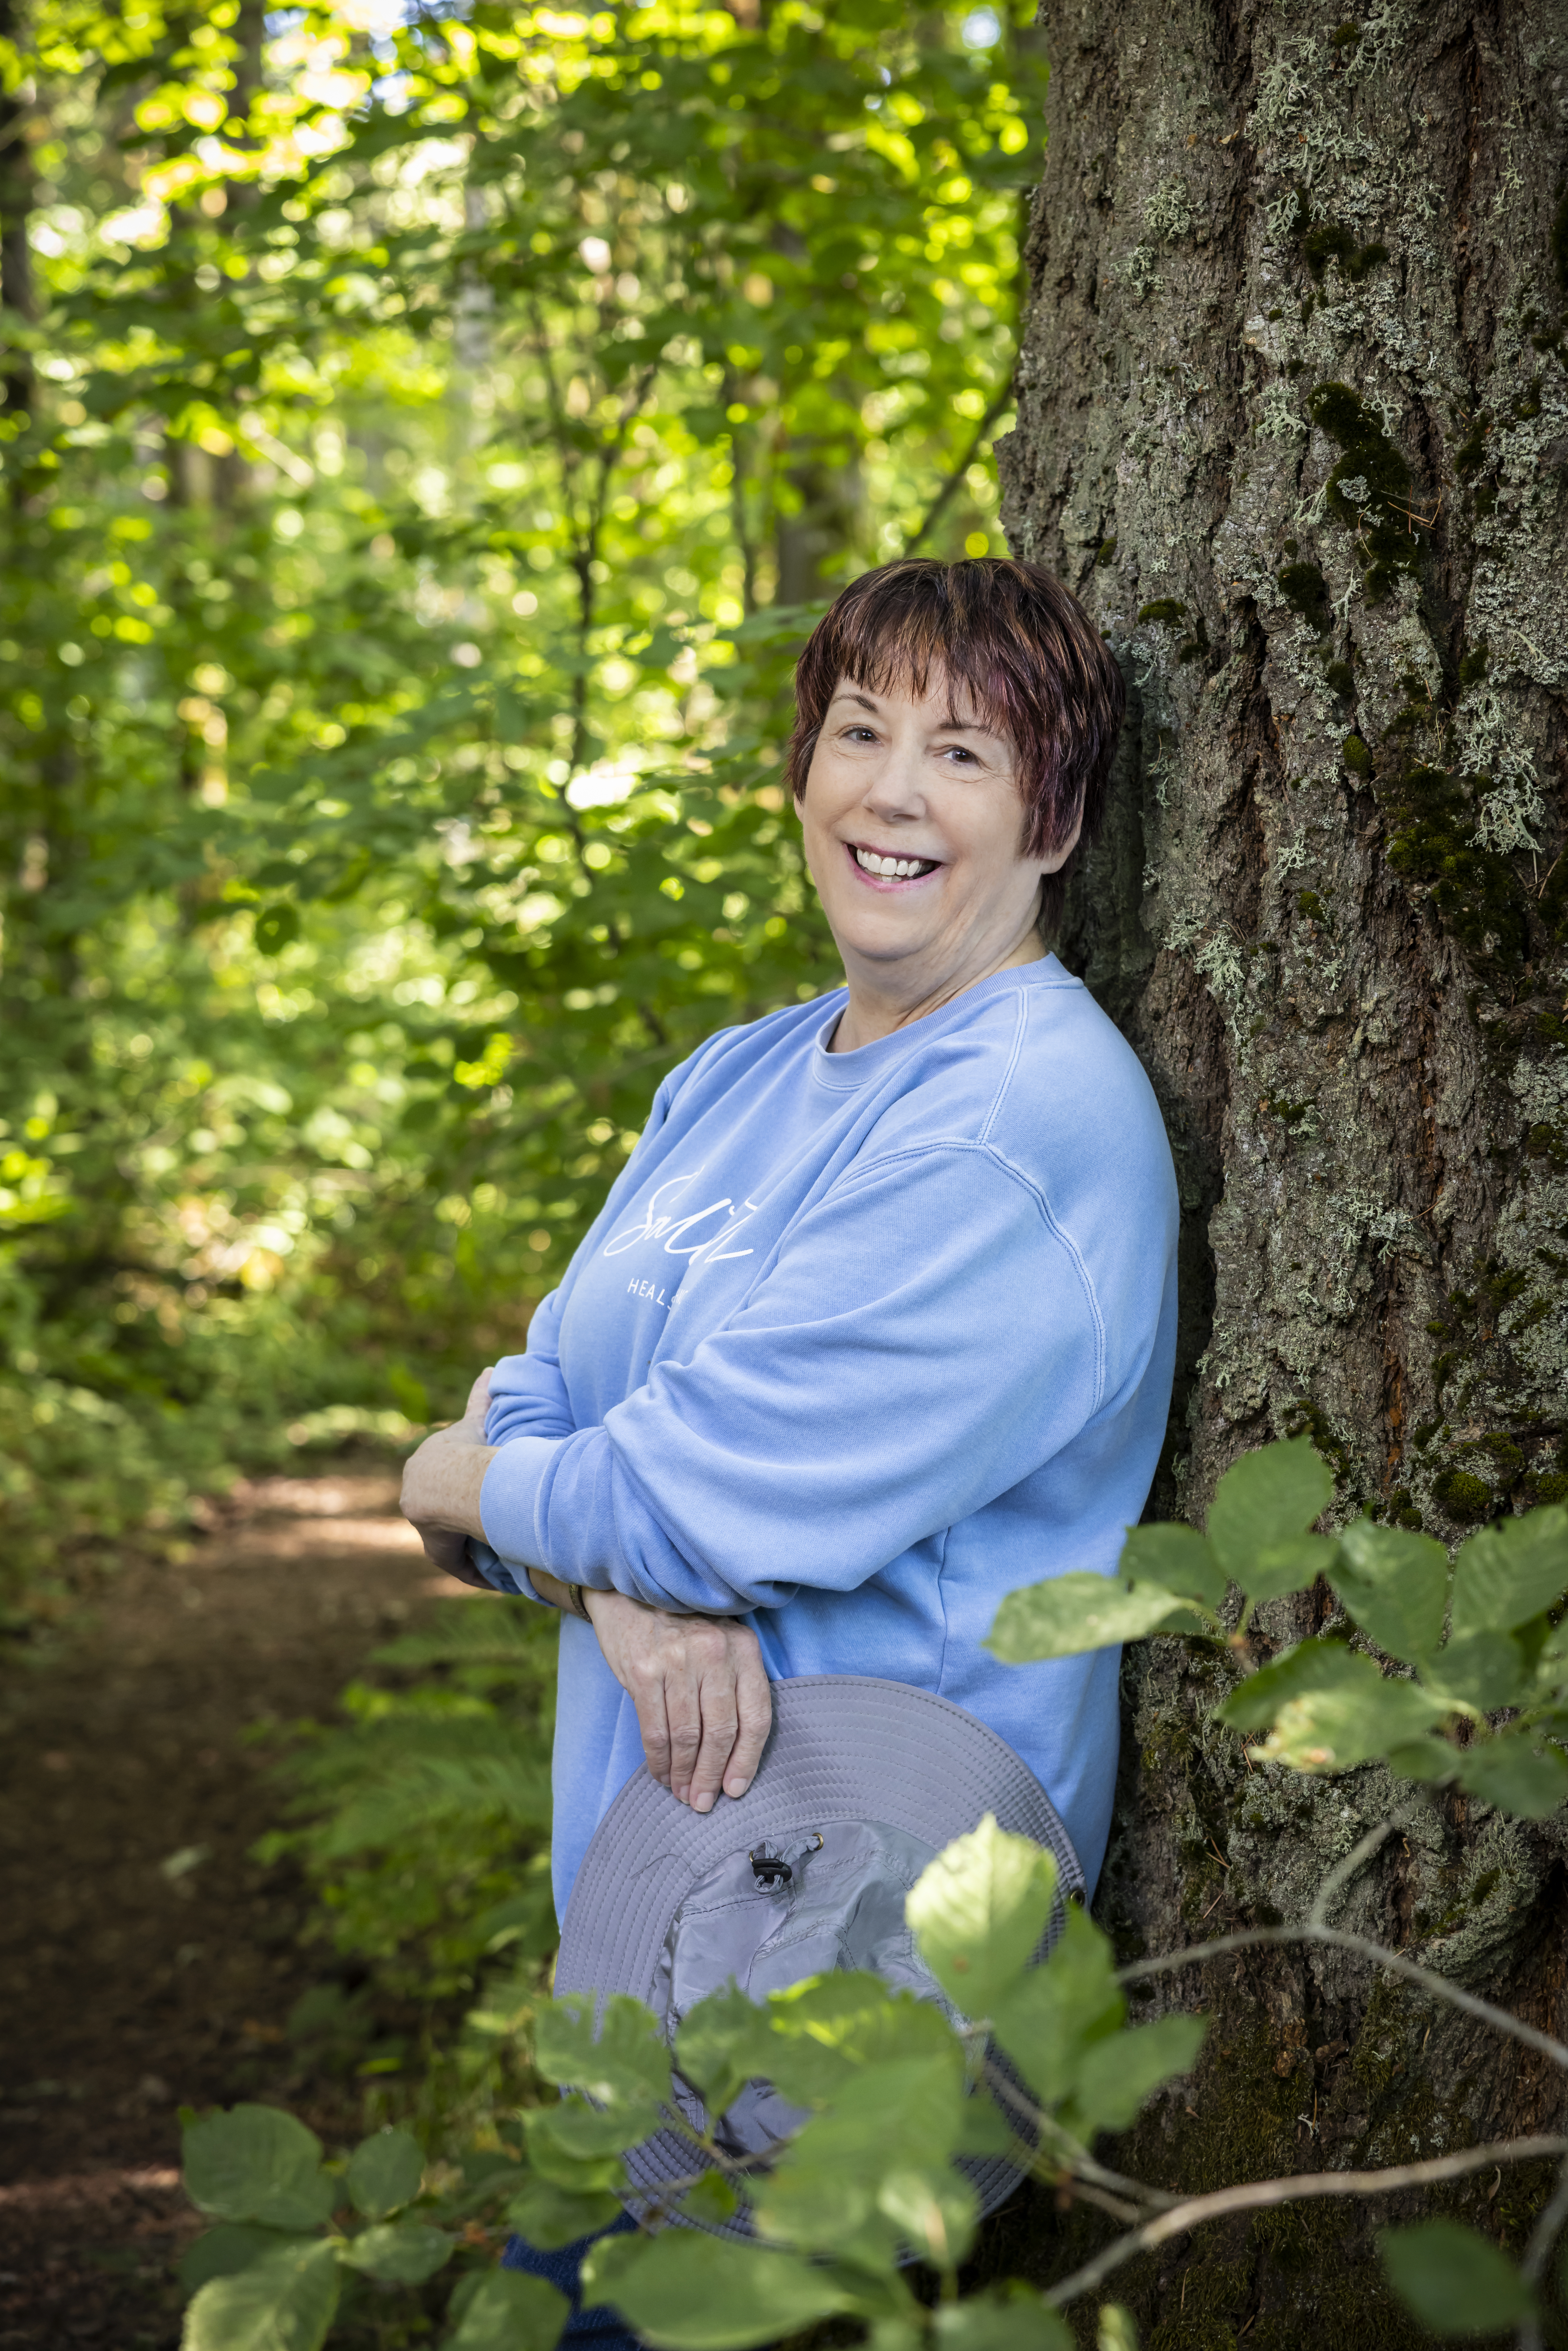 Erin, a resident at the Hillside community, smiling and leaning against a tree wearing a blue shirt with arms crossed